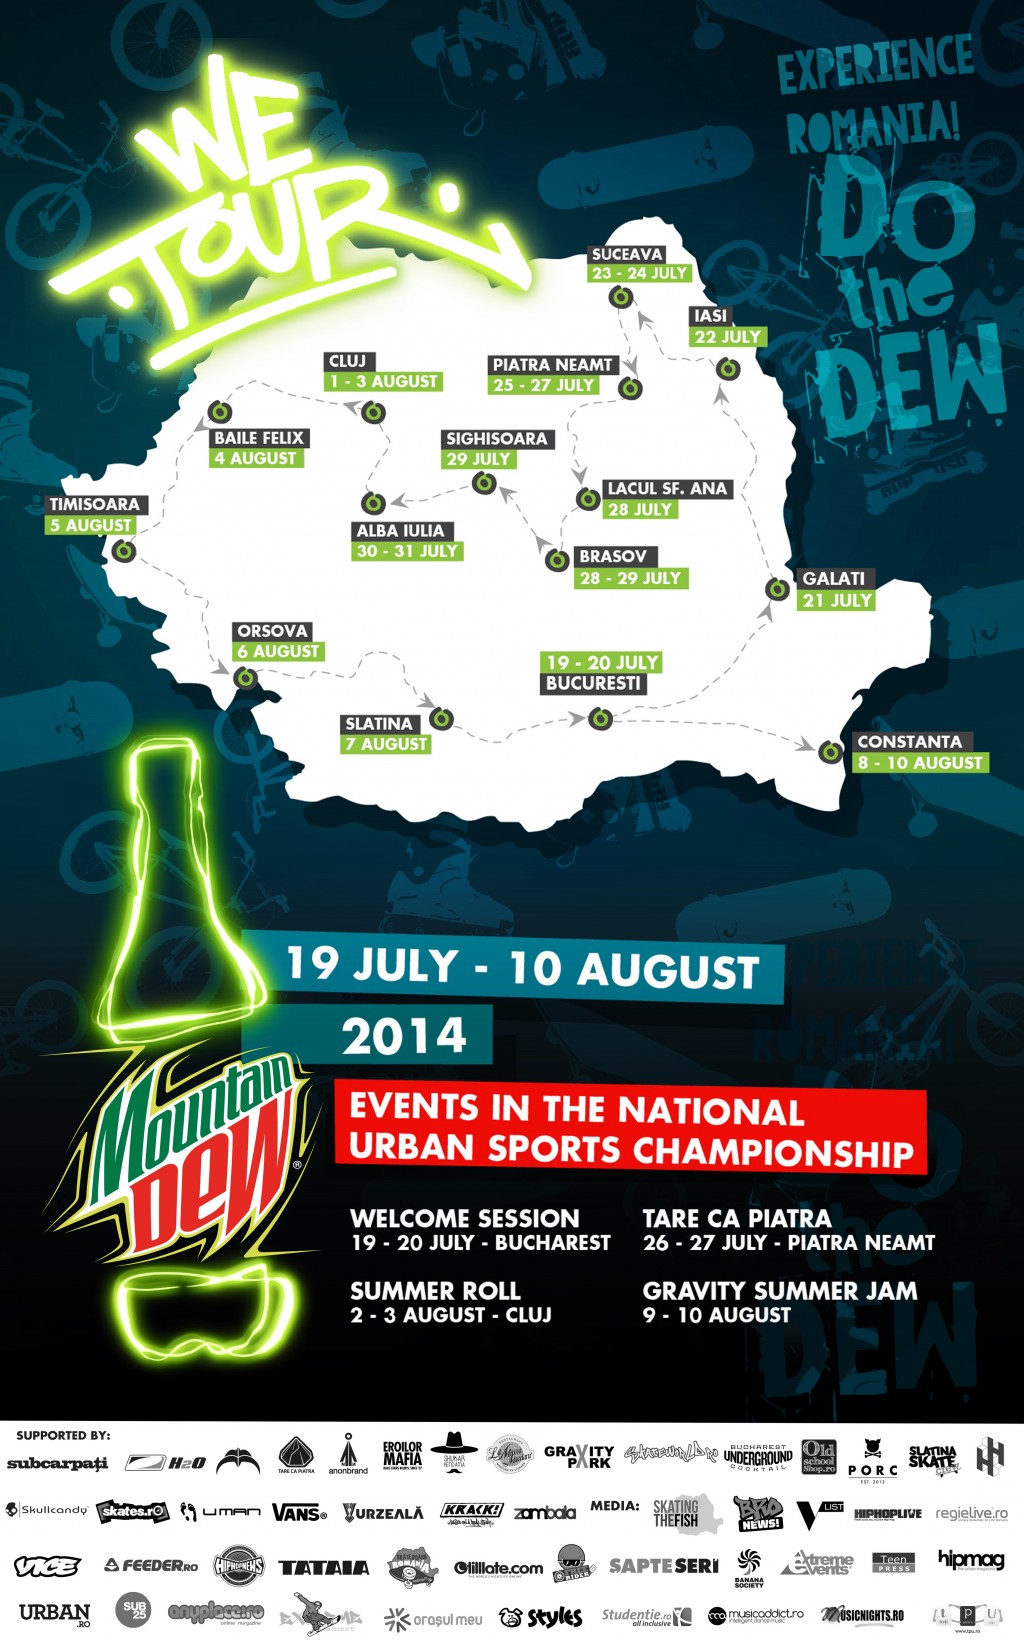 Ultima strigare: Who`s ready to Experience Romania like we dew?